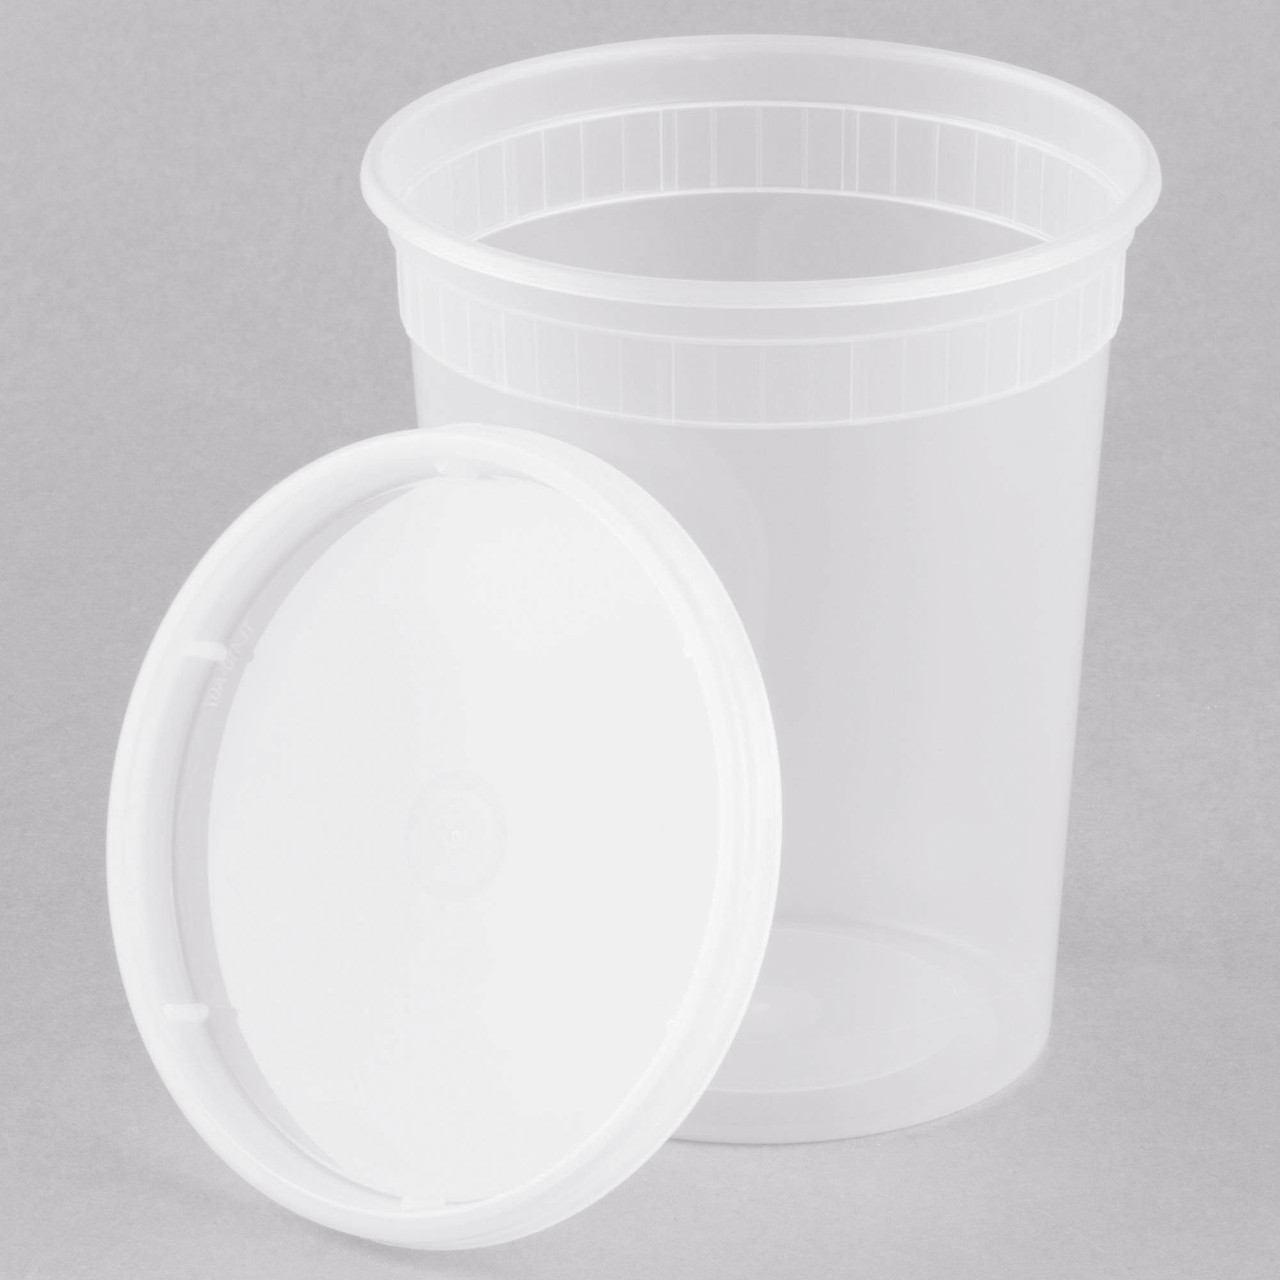 12pcs Round Clear Plastic Container With Lid -  Sweden